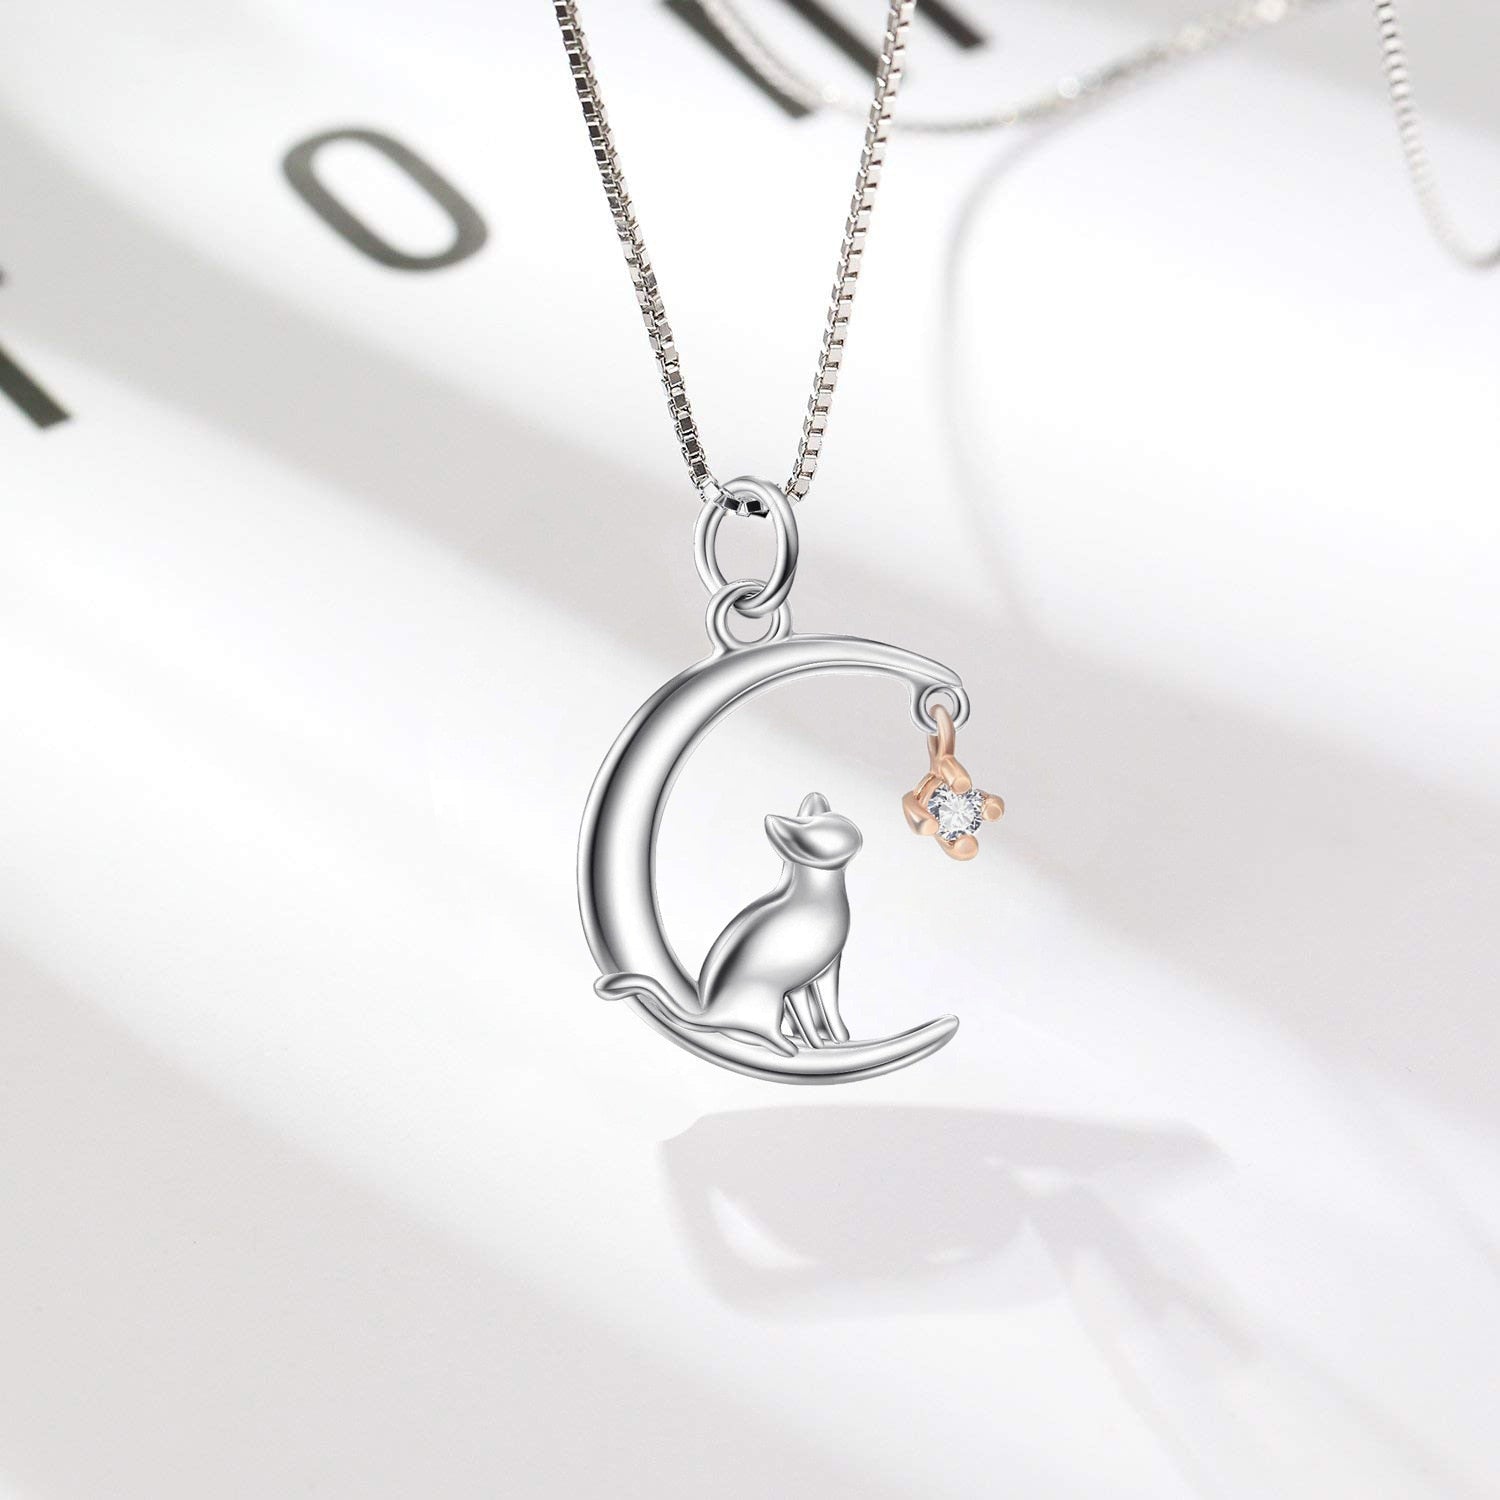 Cat Moon Star Necklace - Cat necklace